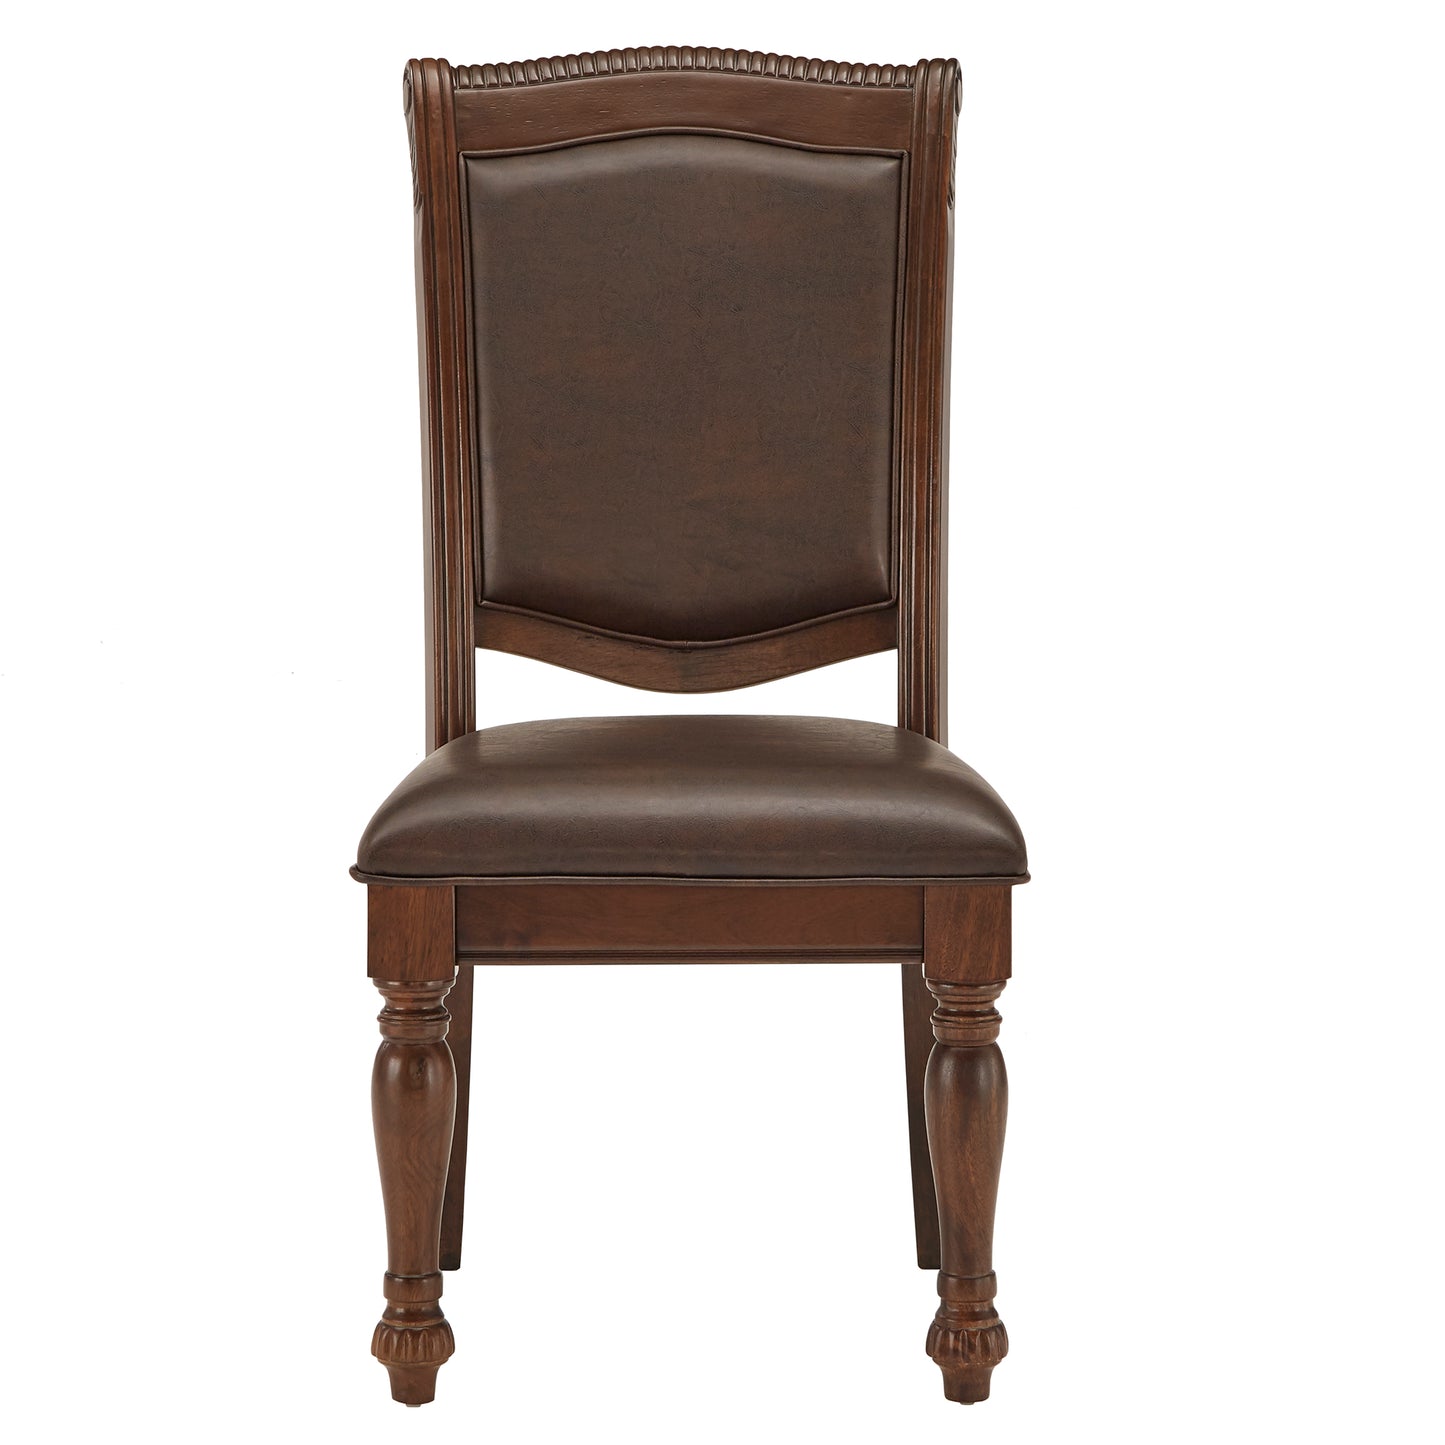 Brown Faux Leather Dining Chairs (Set of 2) - Side Chairs